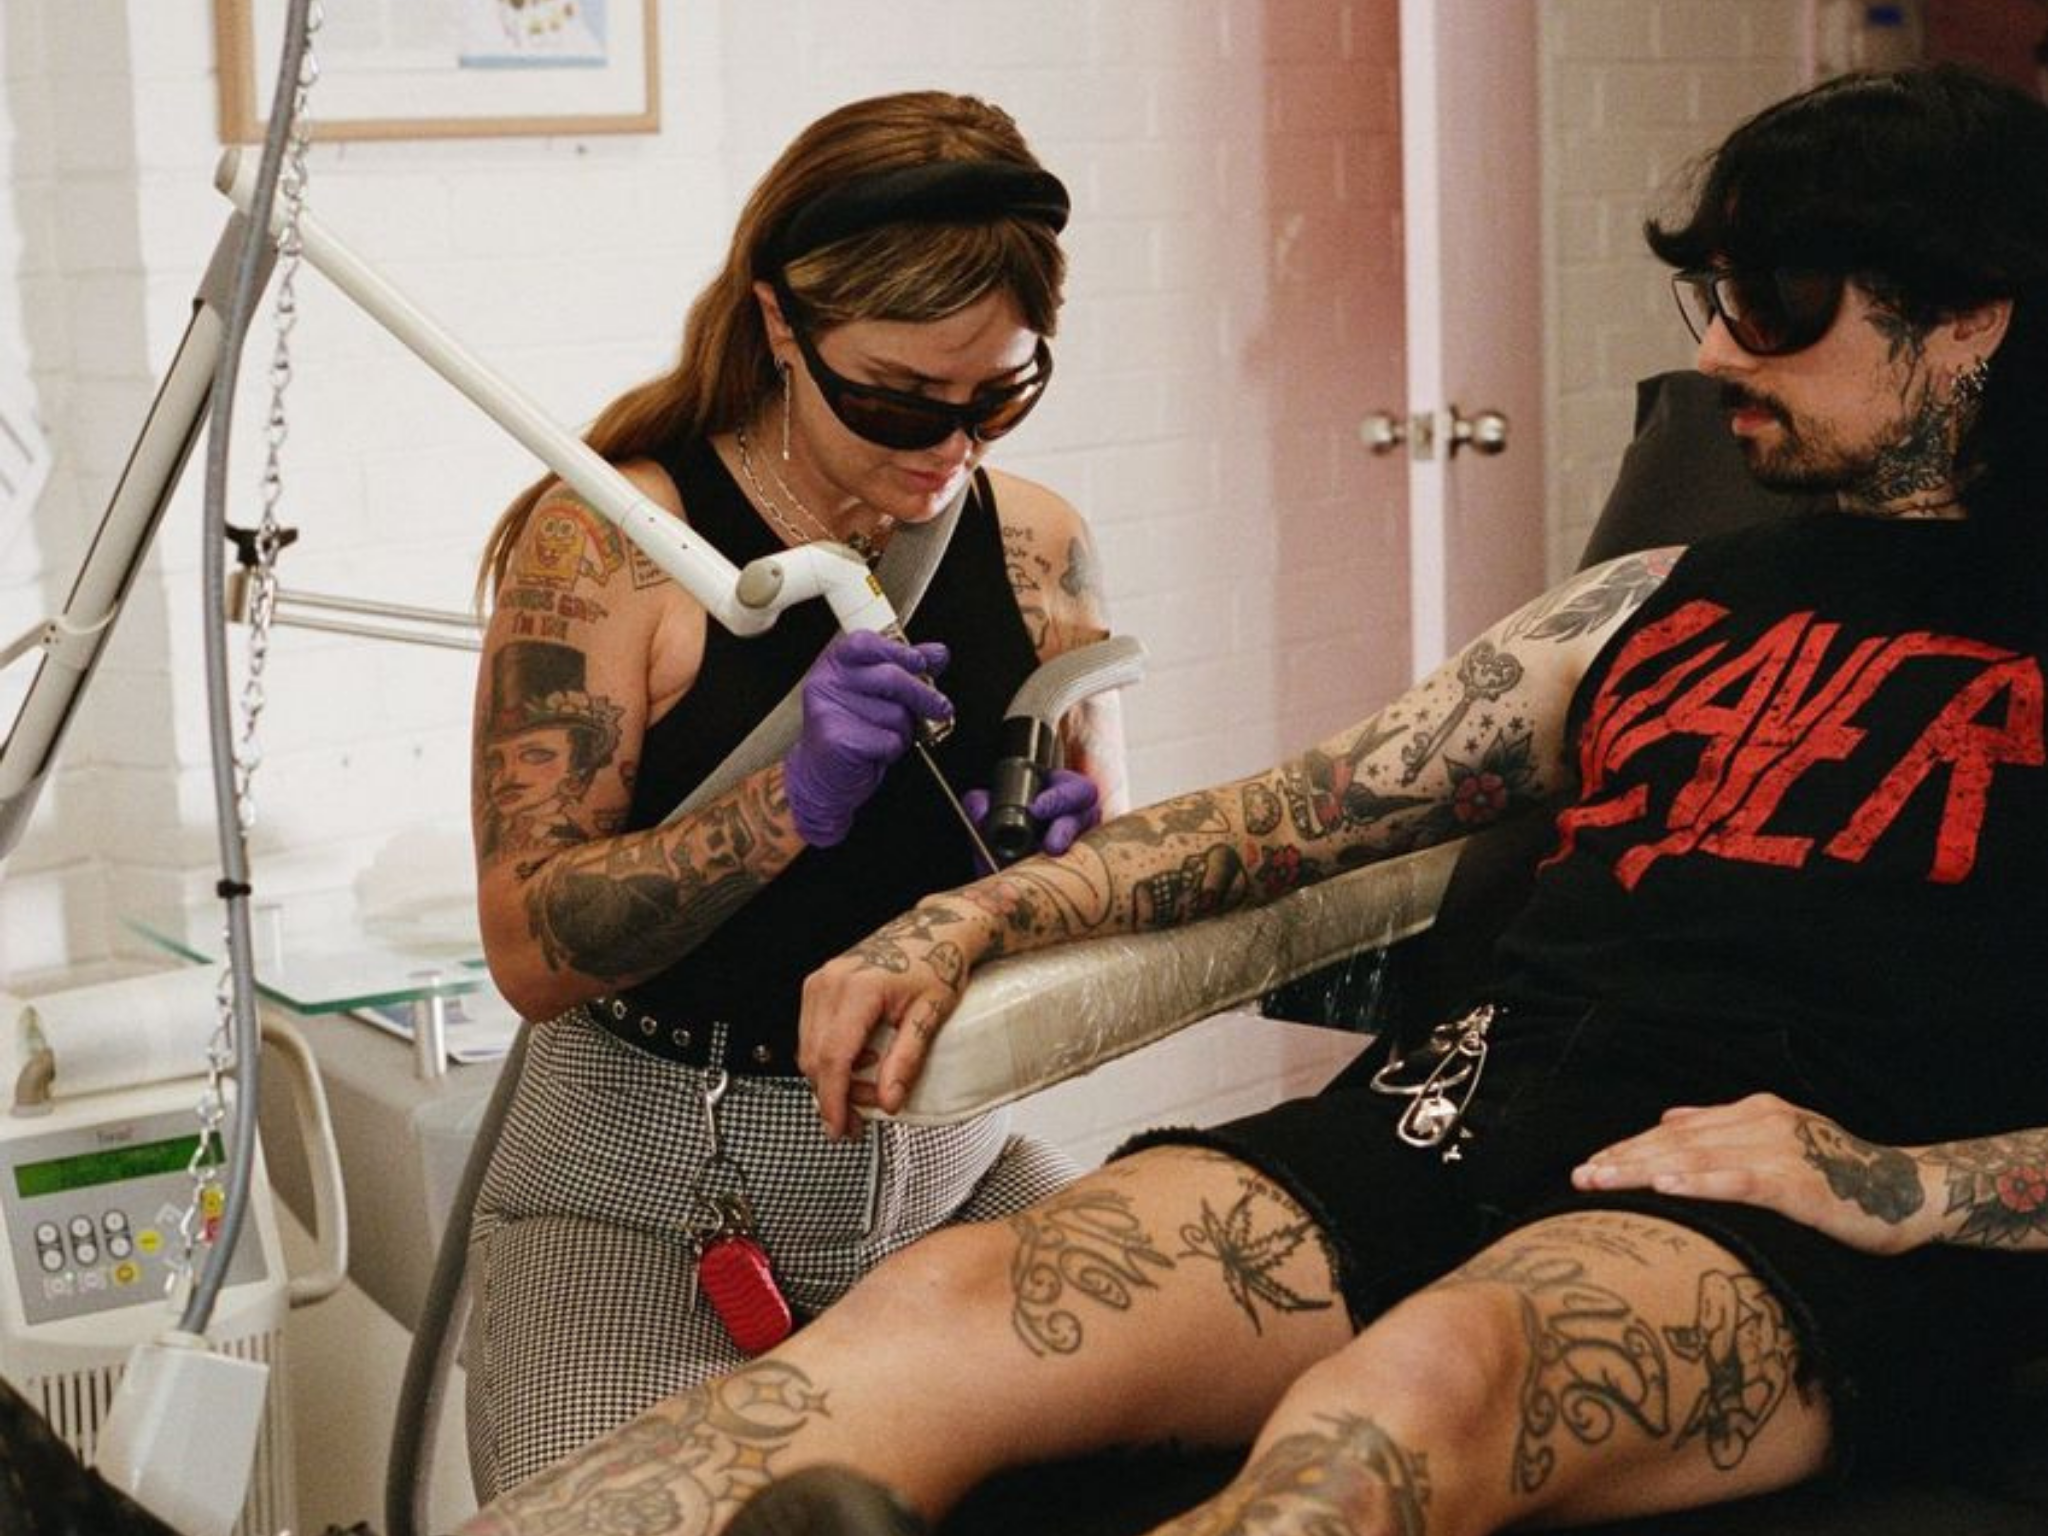 Get your unwanted tattoos removed at Lazer Erazer in Collingwood, Melbourne